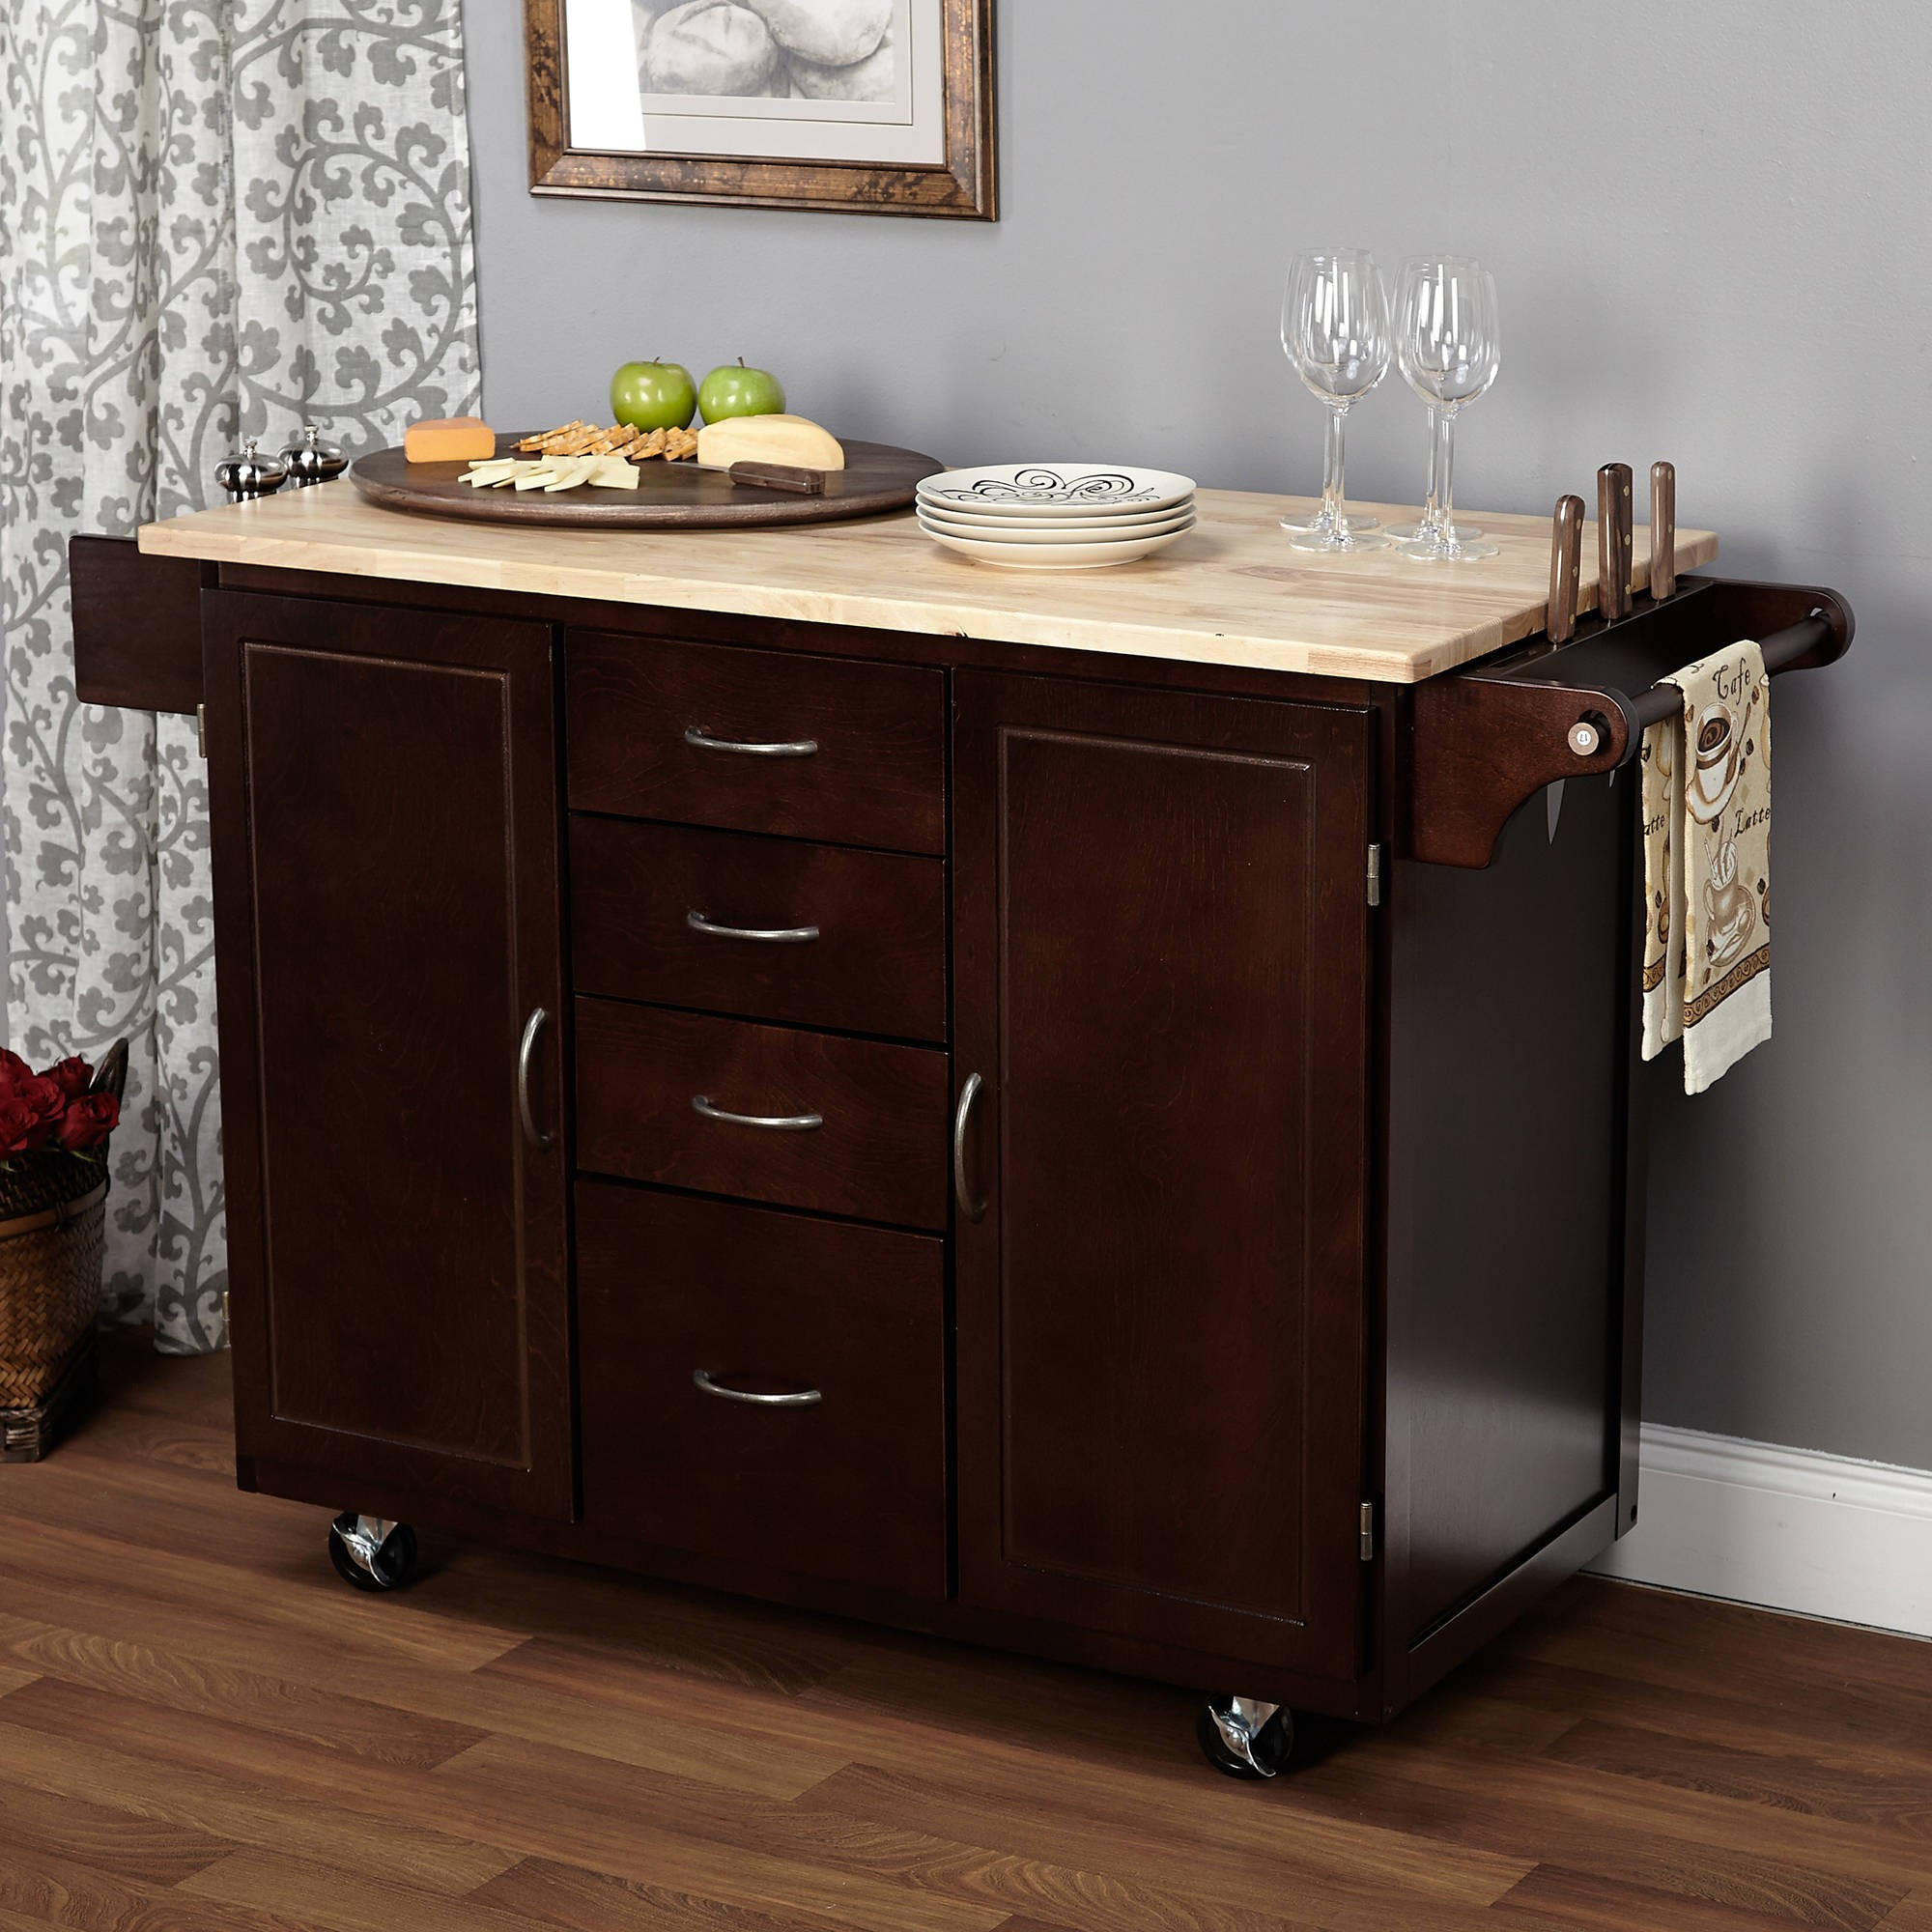 Small Rolling Kitchen Cart
 Best Small Rolling Kitchen Cart